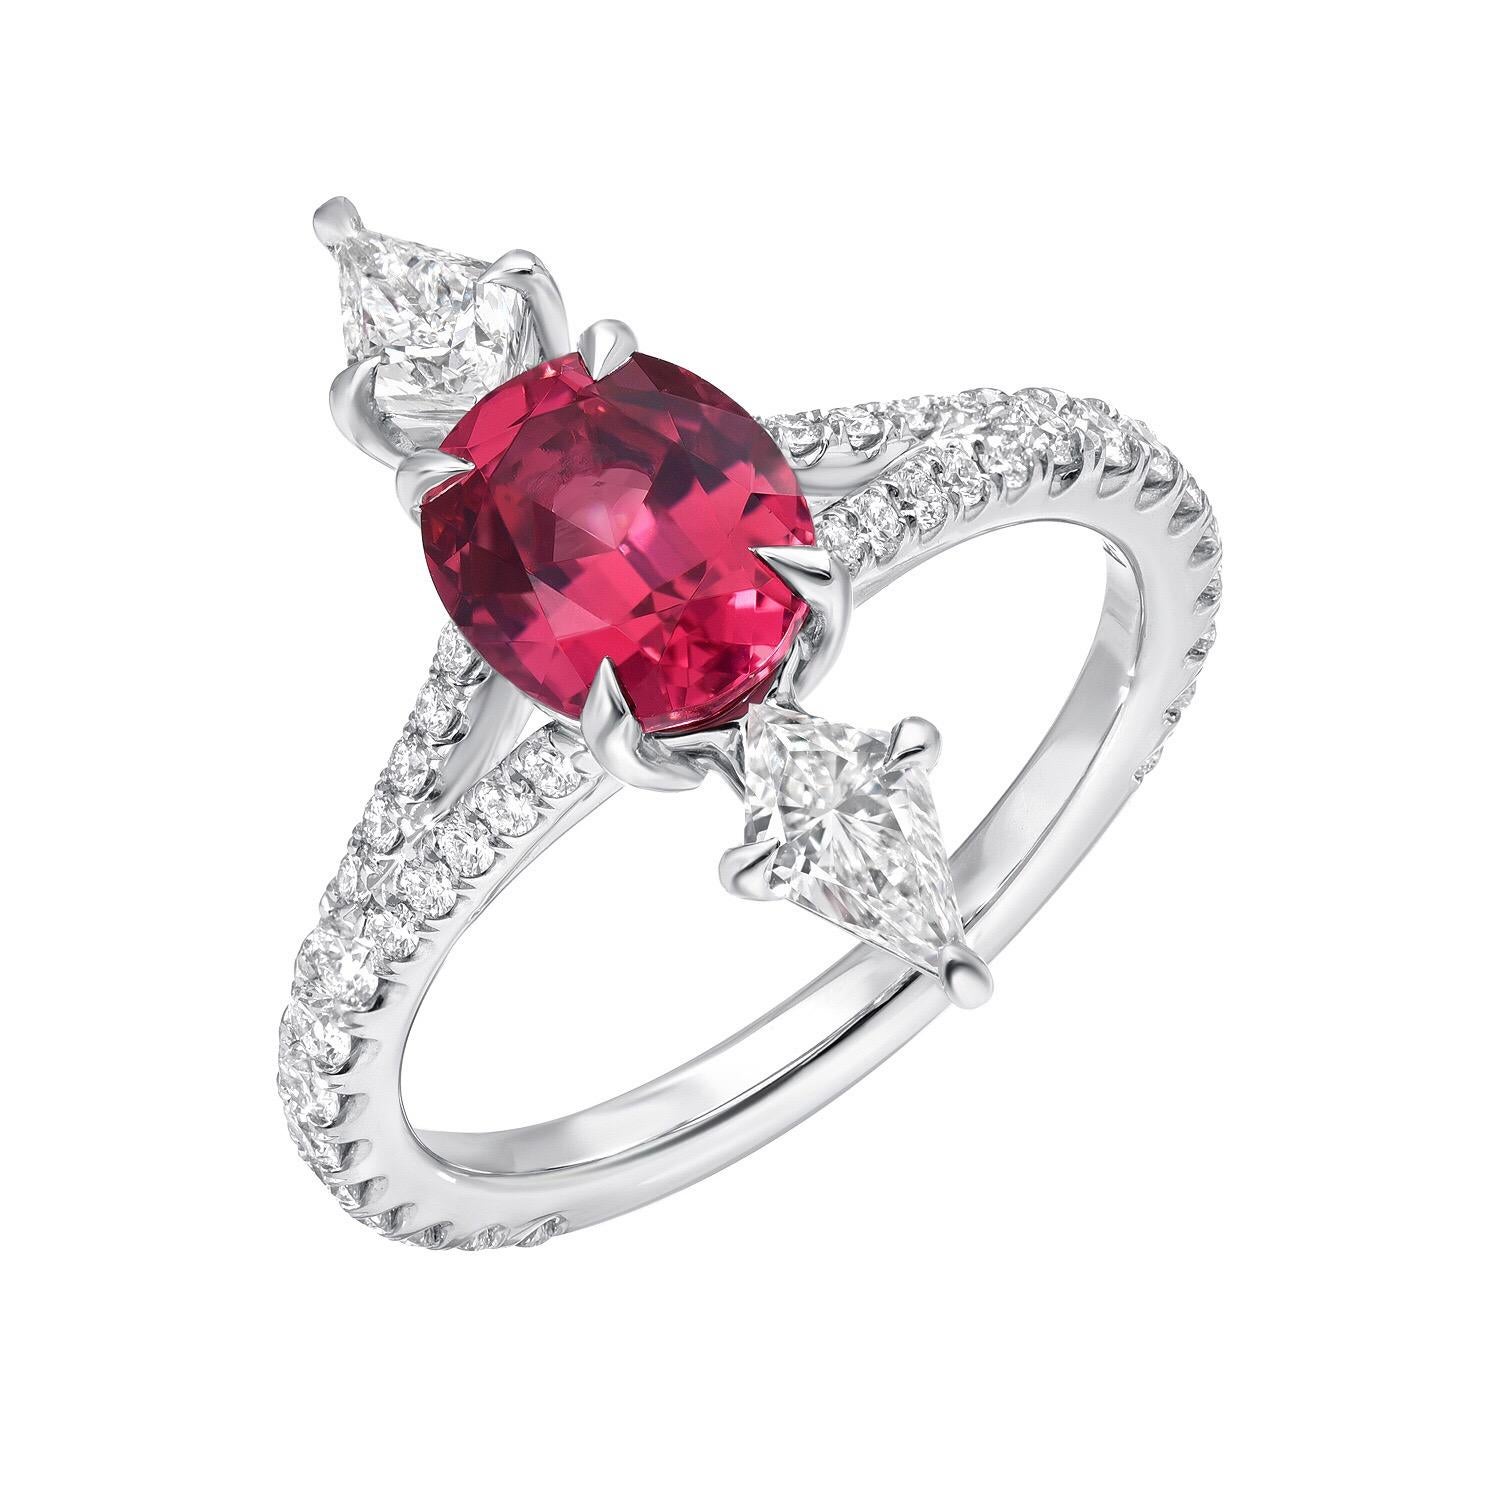 Ultra fine Pink Spinel oval, weighing a total of 1.47 carats, is joined by a pair of kite shaped diamonds, E/VS1, weighing a total of 0.48 carats, and adorned by a total of 0.50 carats of round brilliant diamonds on the shank, to create this